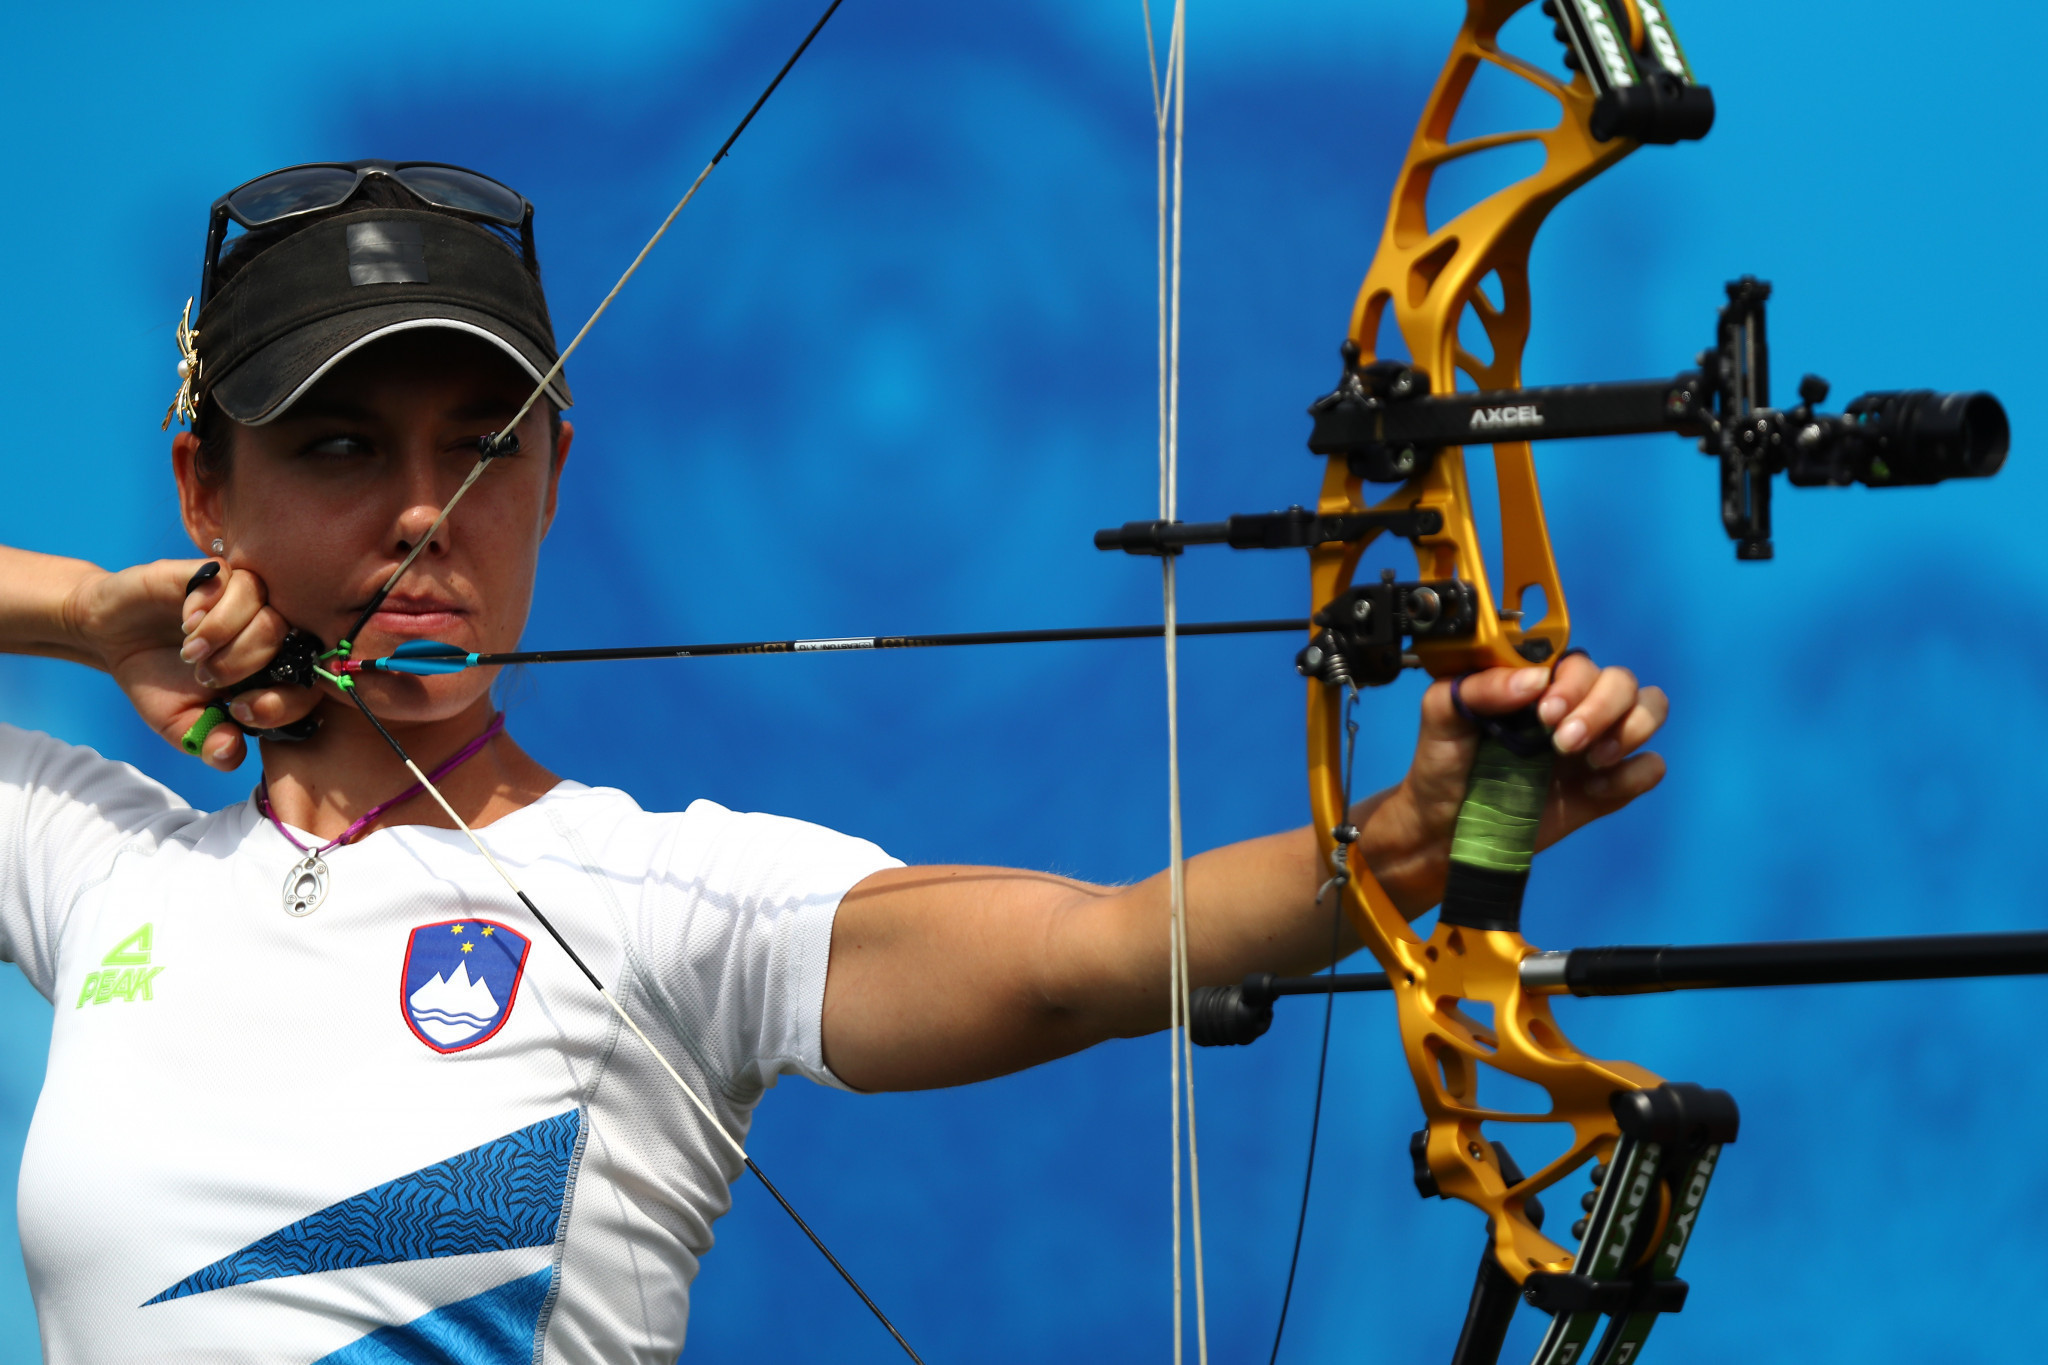 Slovenia's Toja Ellison is among the defending champions on the Indoor Archery World Series ©Getty Images